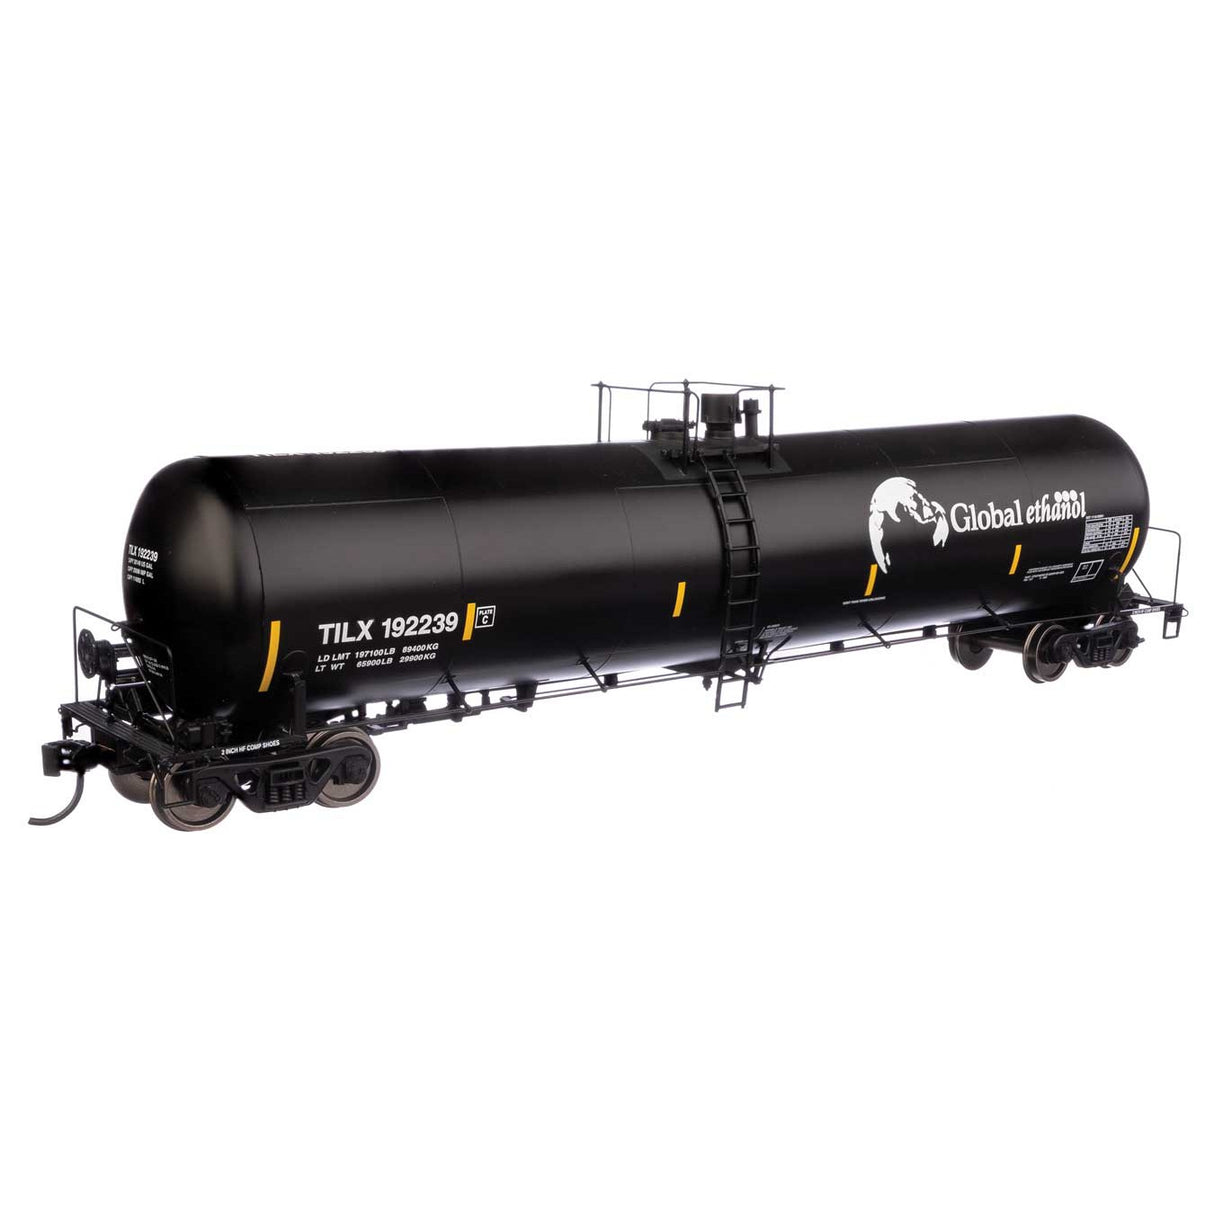 Walthers Proto 55' Trinity 30,145-Gallon Tank Car Global Ethanol TILX #192239 (black, white, yellow conspicuity marks)